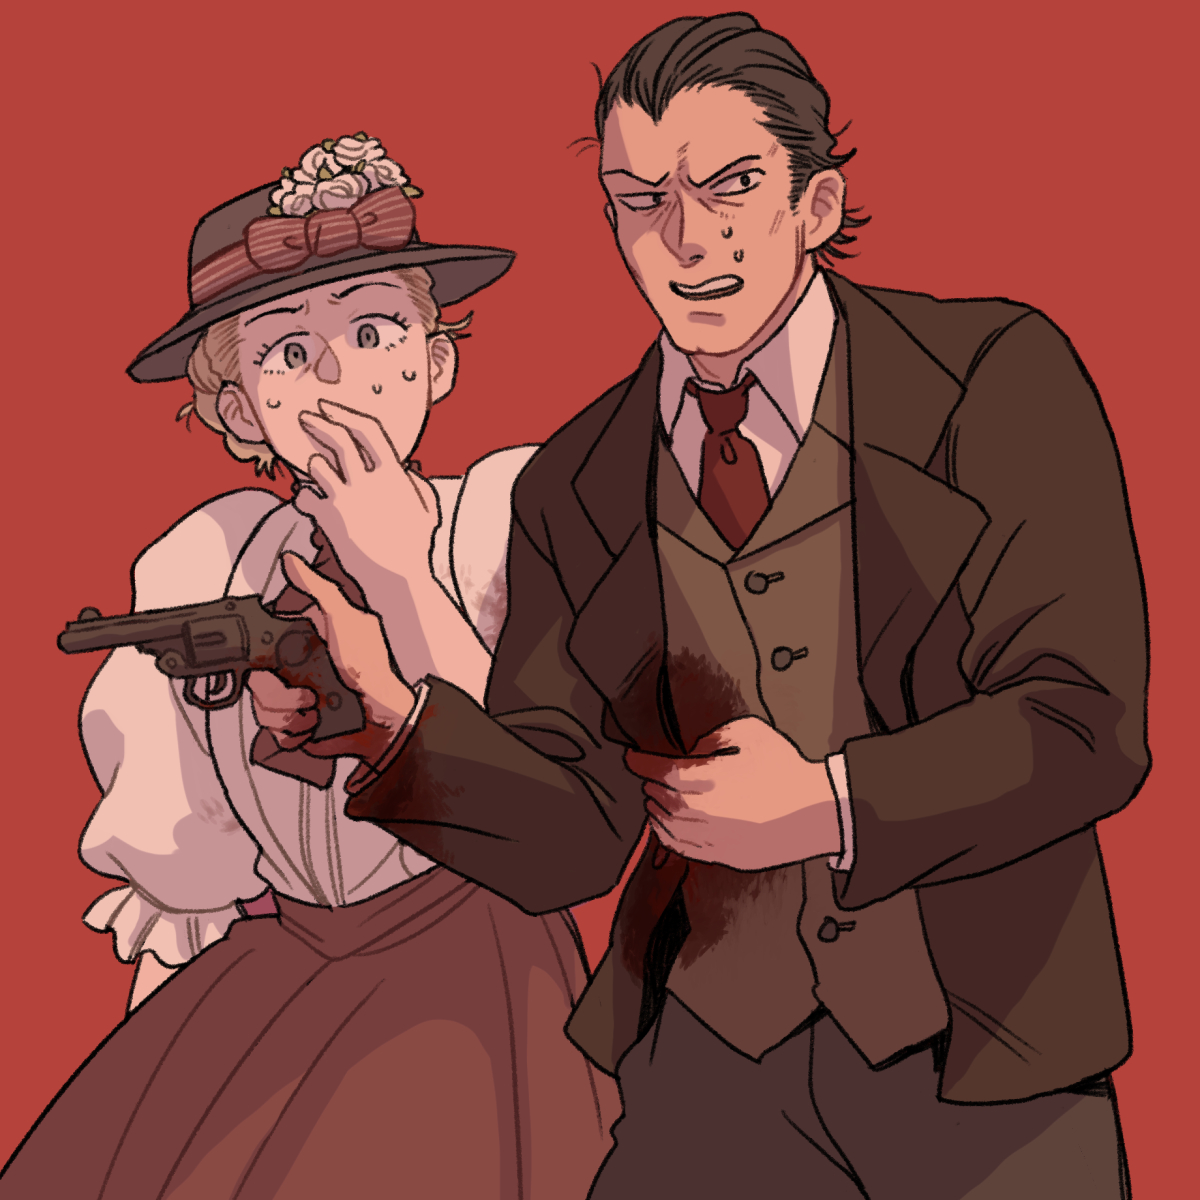 [ Ajin ] [ Nakatomi ]
Drew this as a non-spoilery cover image for Pixiv for a Naomi and Tanaka collection I will upload. Edwardian clothes because I like drawing them :)